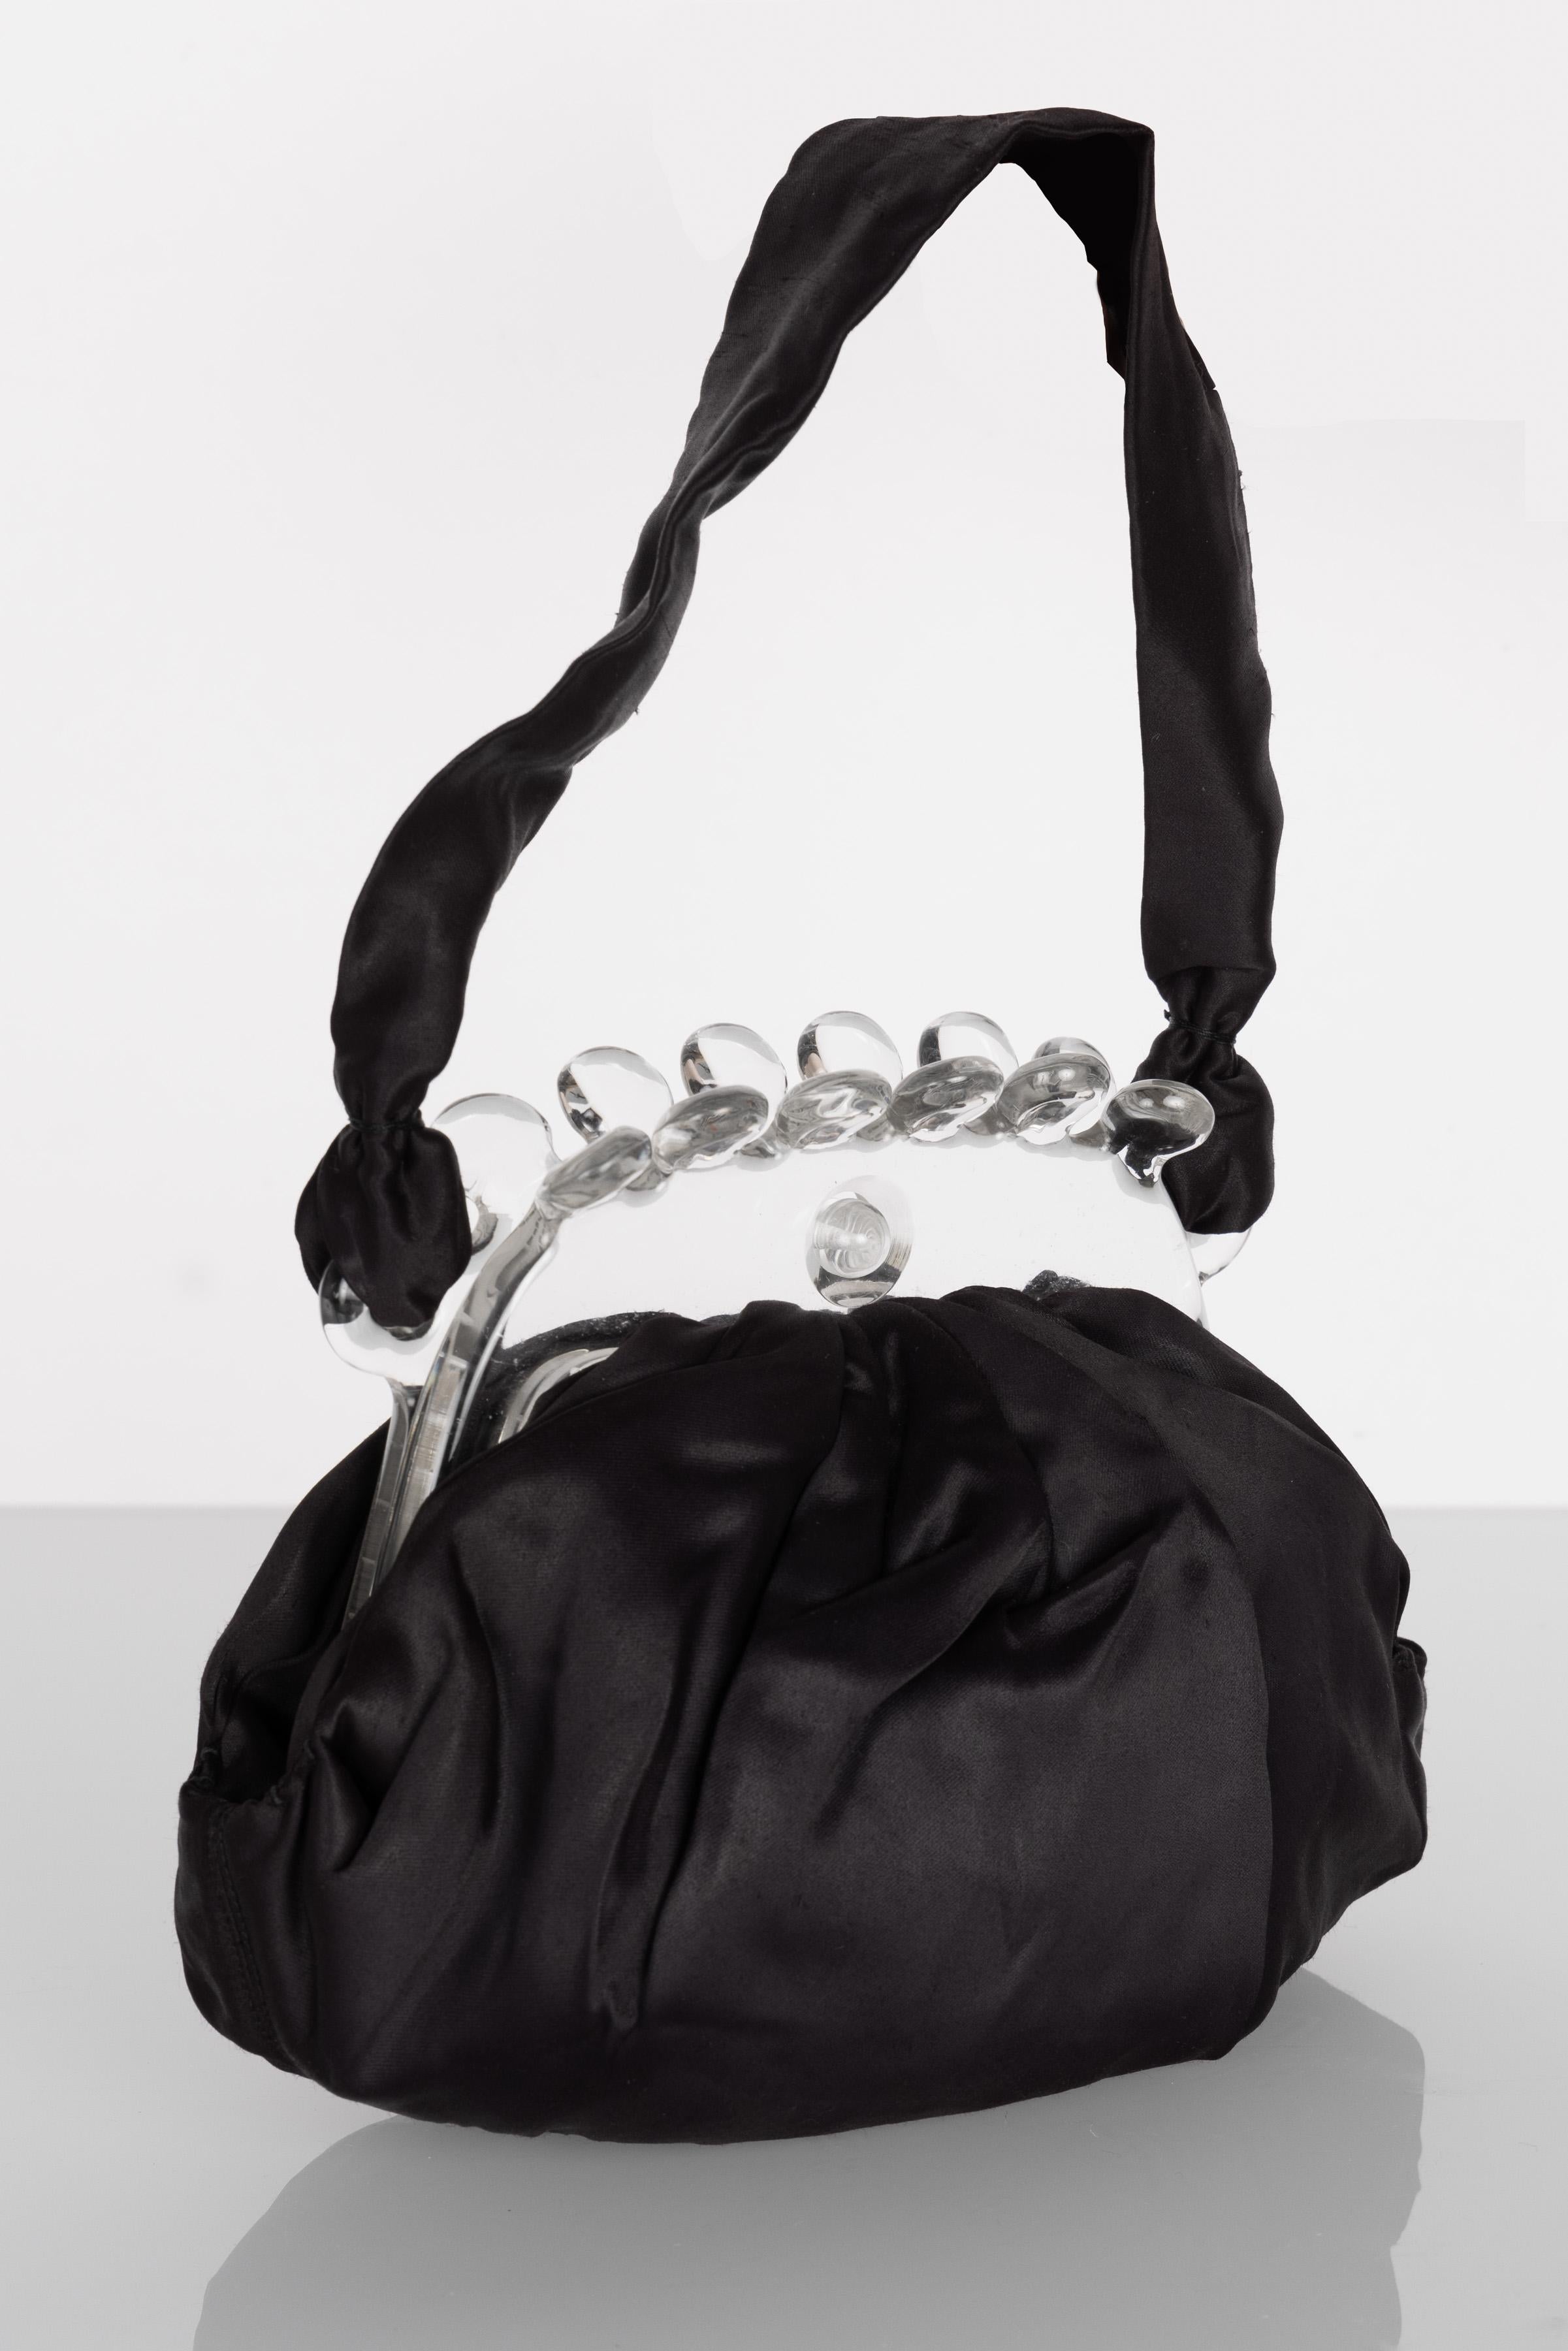 From the 1920s, this unusual evening clutch is elegant and timeless at once. Done in black satin with black satin handles, it has a fabulous, ruffled, clear Lucite standup frame that is thick and sturdy. The black satin is pleated where it meets the